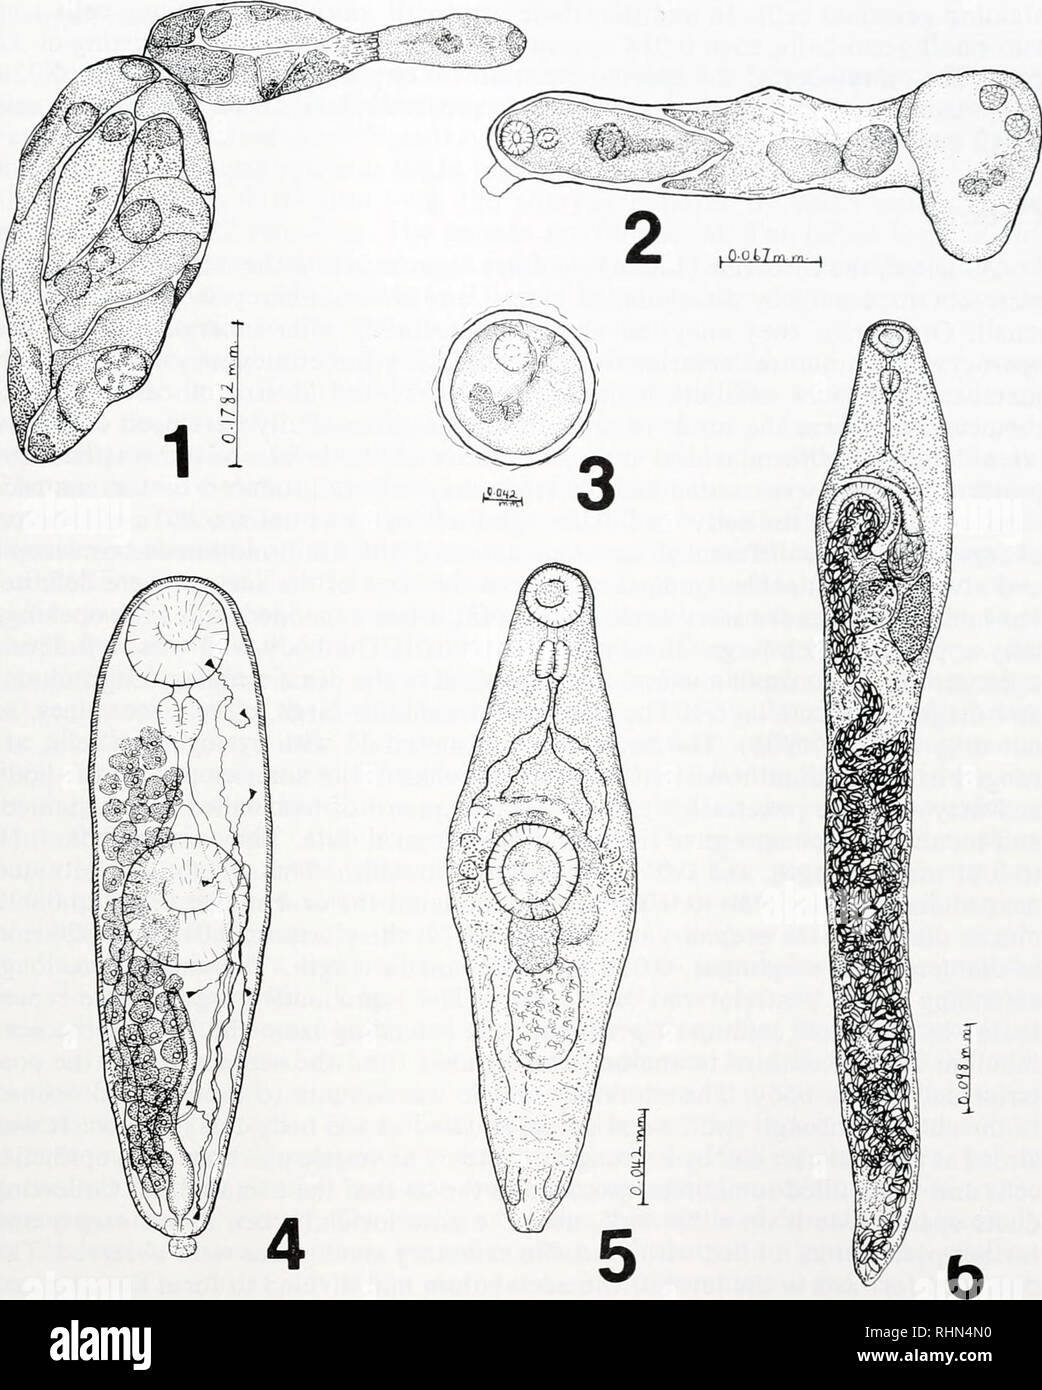 . The Biological bulletin. Biology; Zoology; Biology; Marine Biology. LIFE HISTORY OF LASIOTOCUS ELONGATUS 157. FIGURE 1. Mature daughter sporocyst, 0.94 mm long, with a cercaria emerging through the birth pore. FIGURE 2. Young daughter sporocyst, 0.33 mm long and 0.040 mm wide, with all developmental stages from isolated germinal cells to germ-balls of increasing size and a fully formed cercaria. FIGURE 3. Encysted metacercaria, recovered from seawater, 0.072 mm in diameter. FIGURE 4. Cercaria, drawn from pencil sketches of living specimens, showing cystogenous glands, and details of the dige Stock Photo